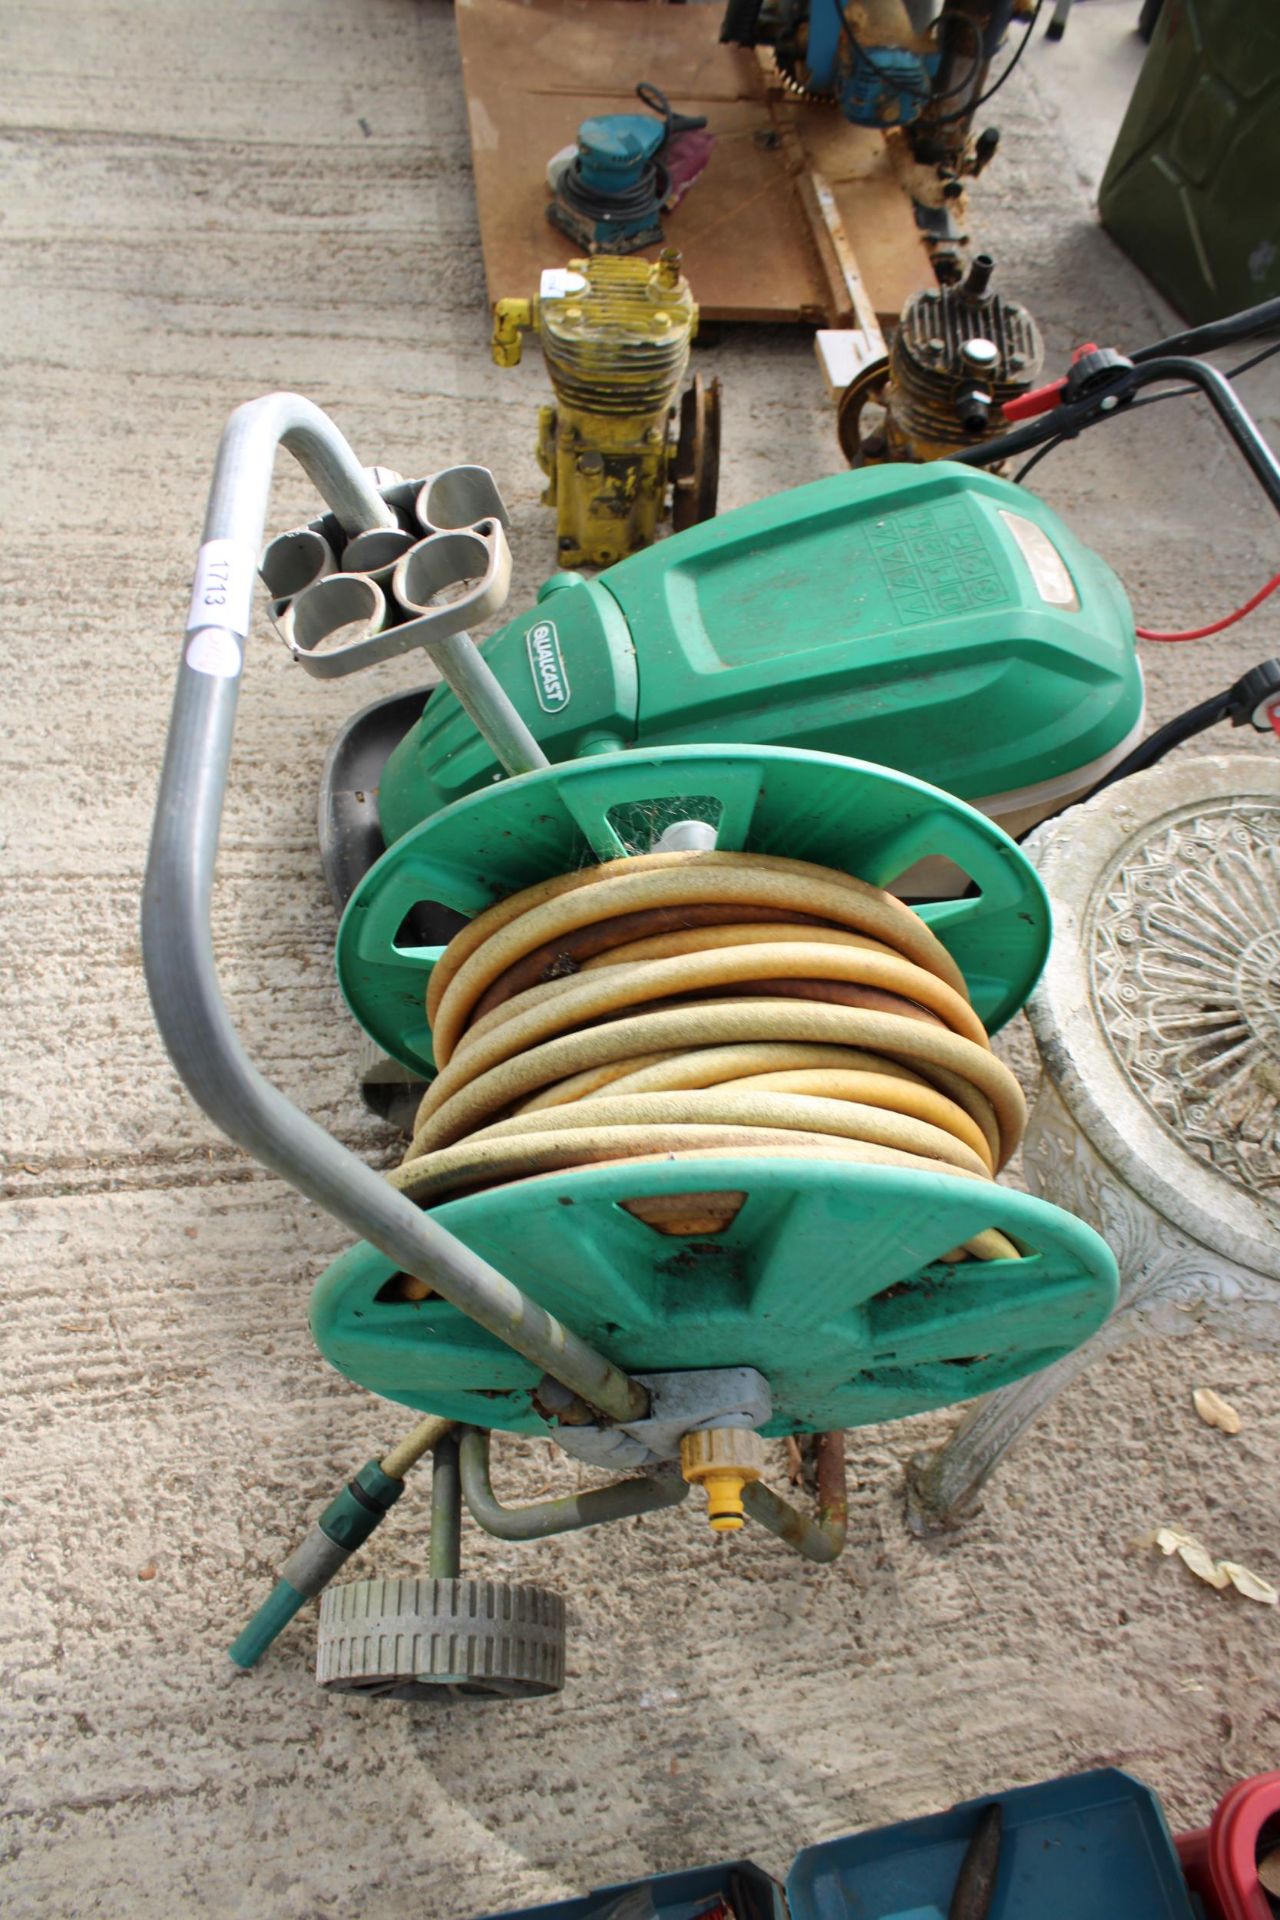 A CAST ALLOY BISTRO CHAIR, A QUALCAST ELECTRIC LAWN MOWER AND A HOSE REEL WITH HOSE - Image 3 of 3